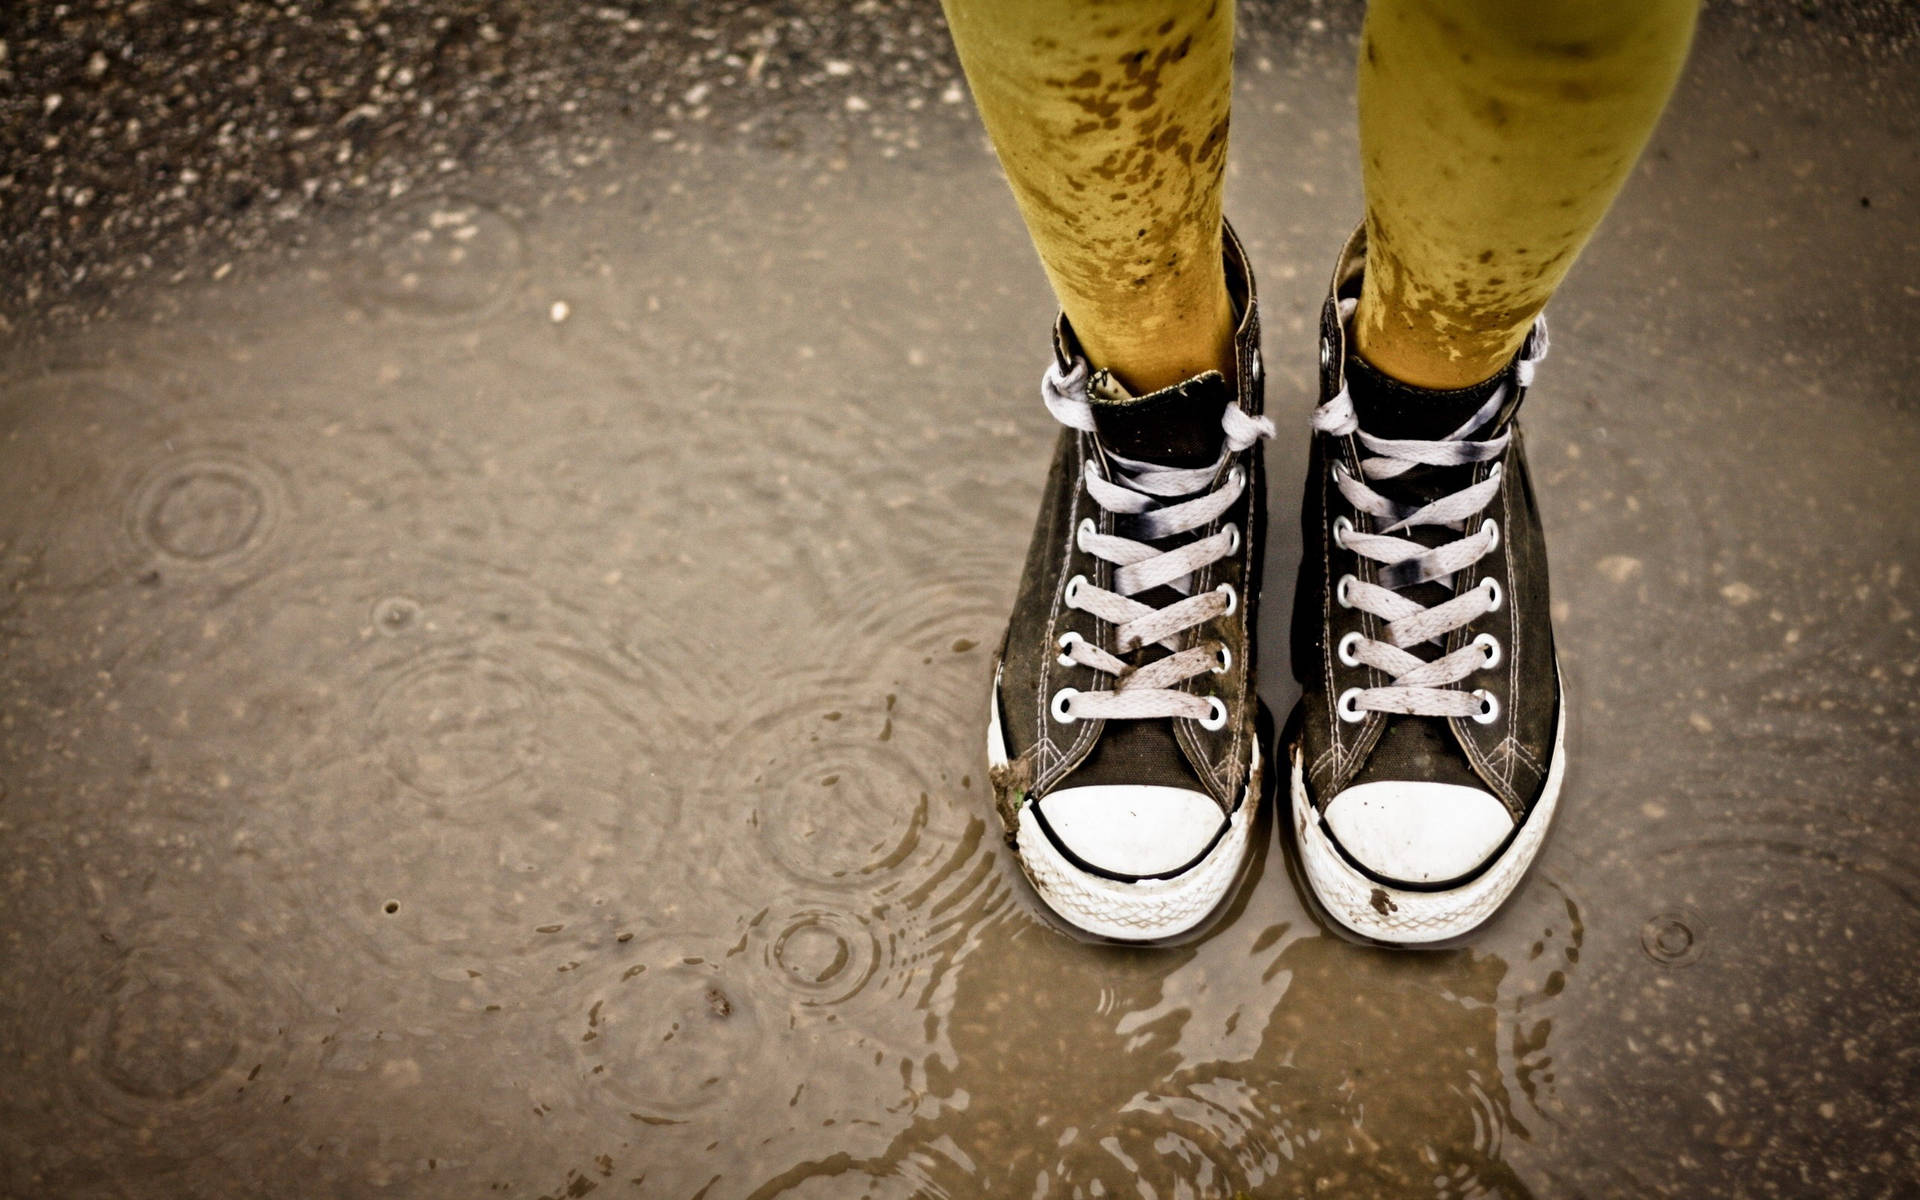 Sneaker On Rain Puddle Background